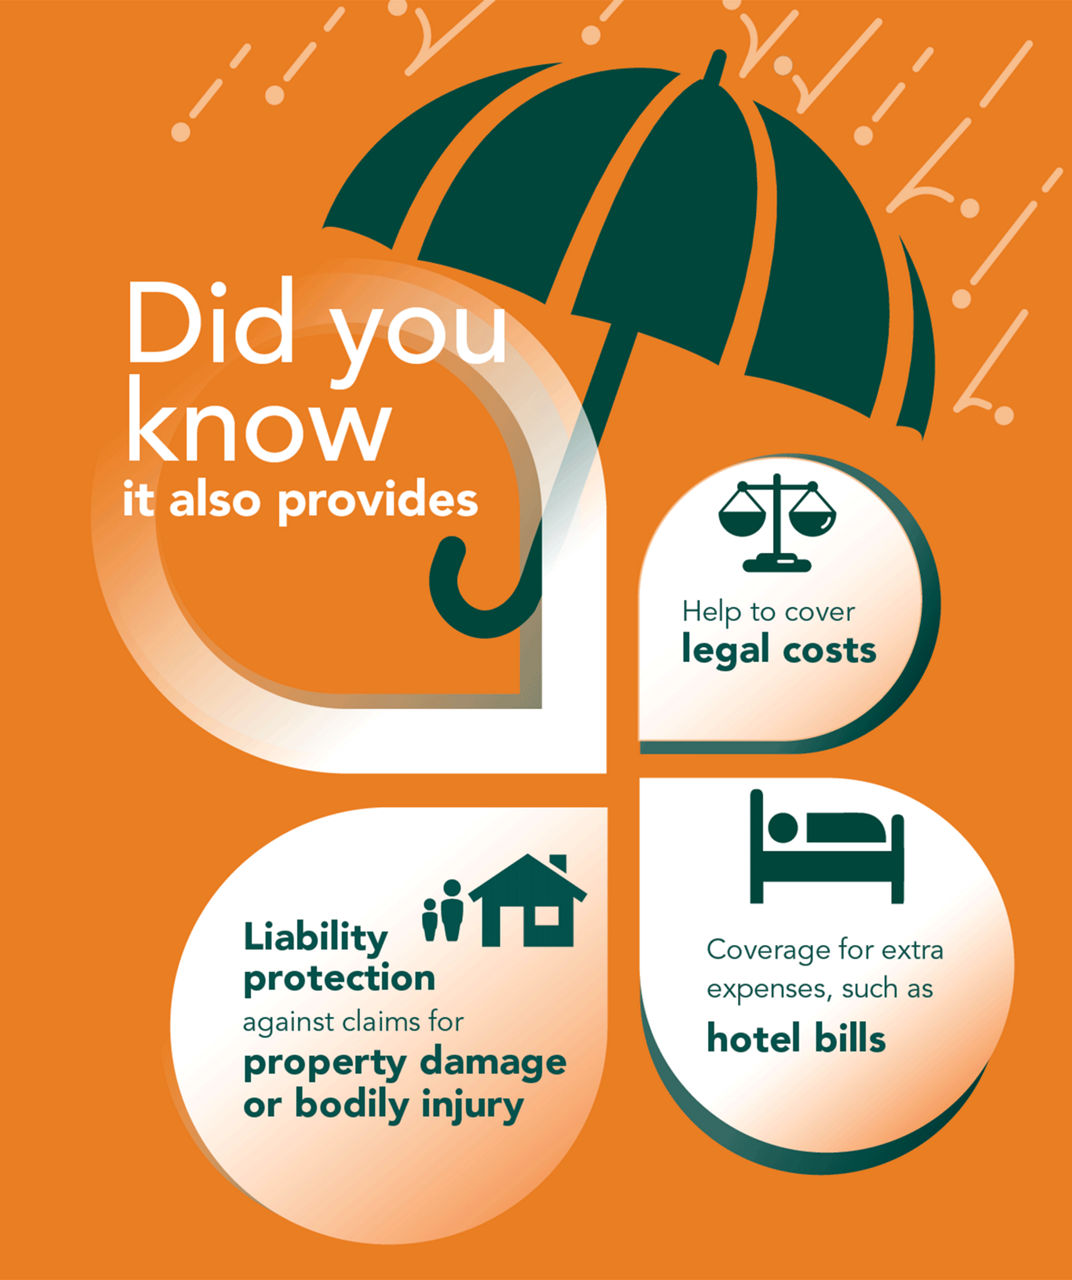 It also helps with legal and hotel bills and liability protection against claims of property damage or bodily injury